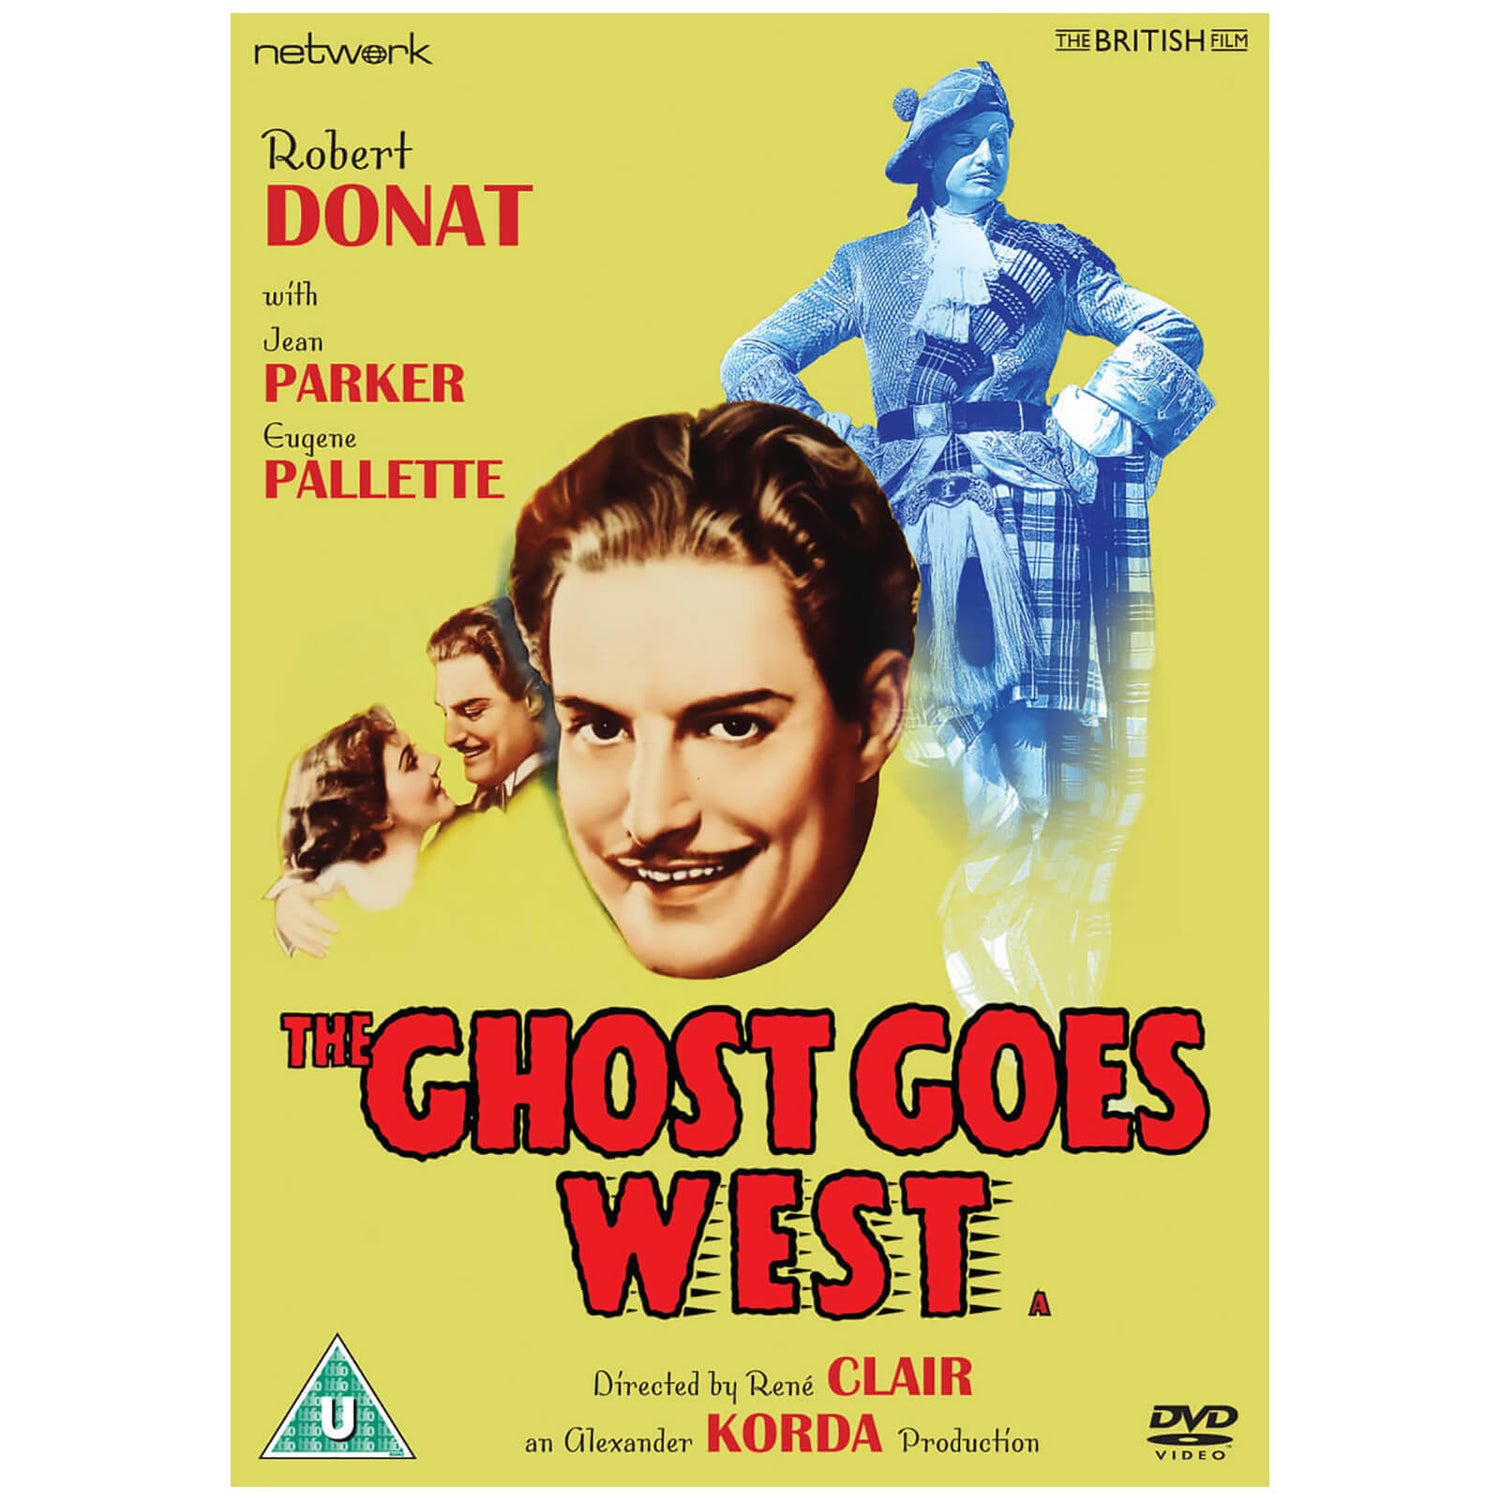 The Ghost Goes West